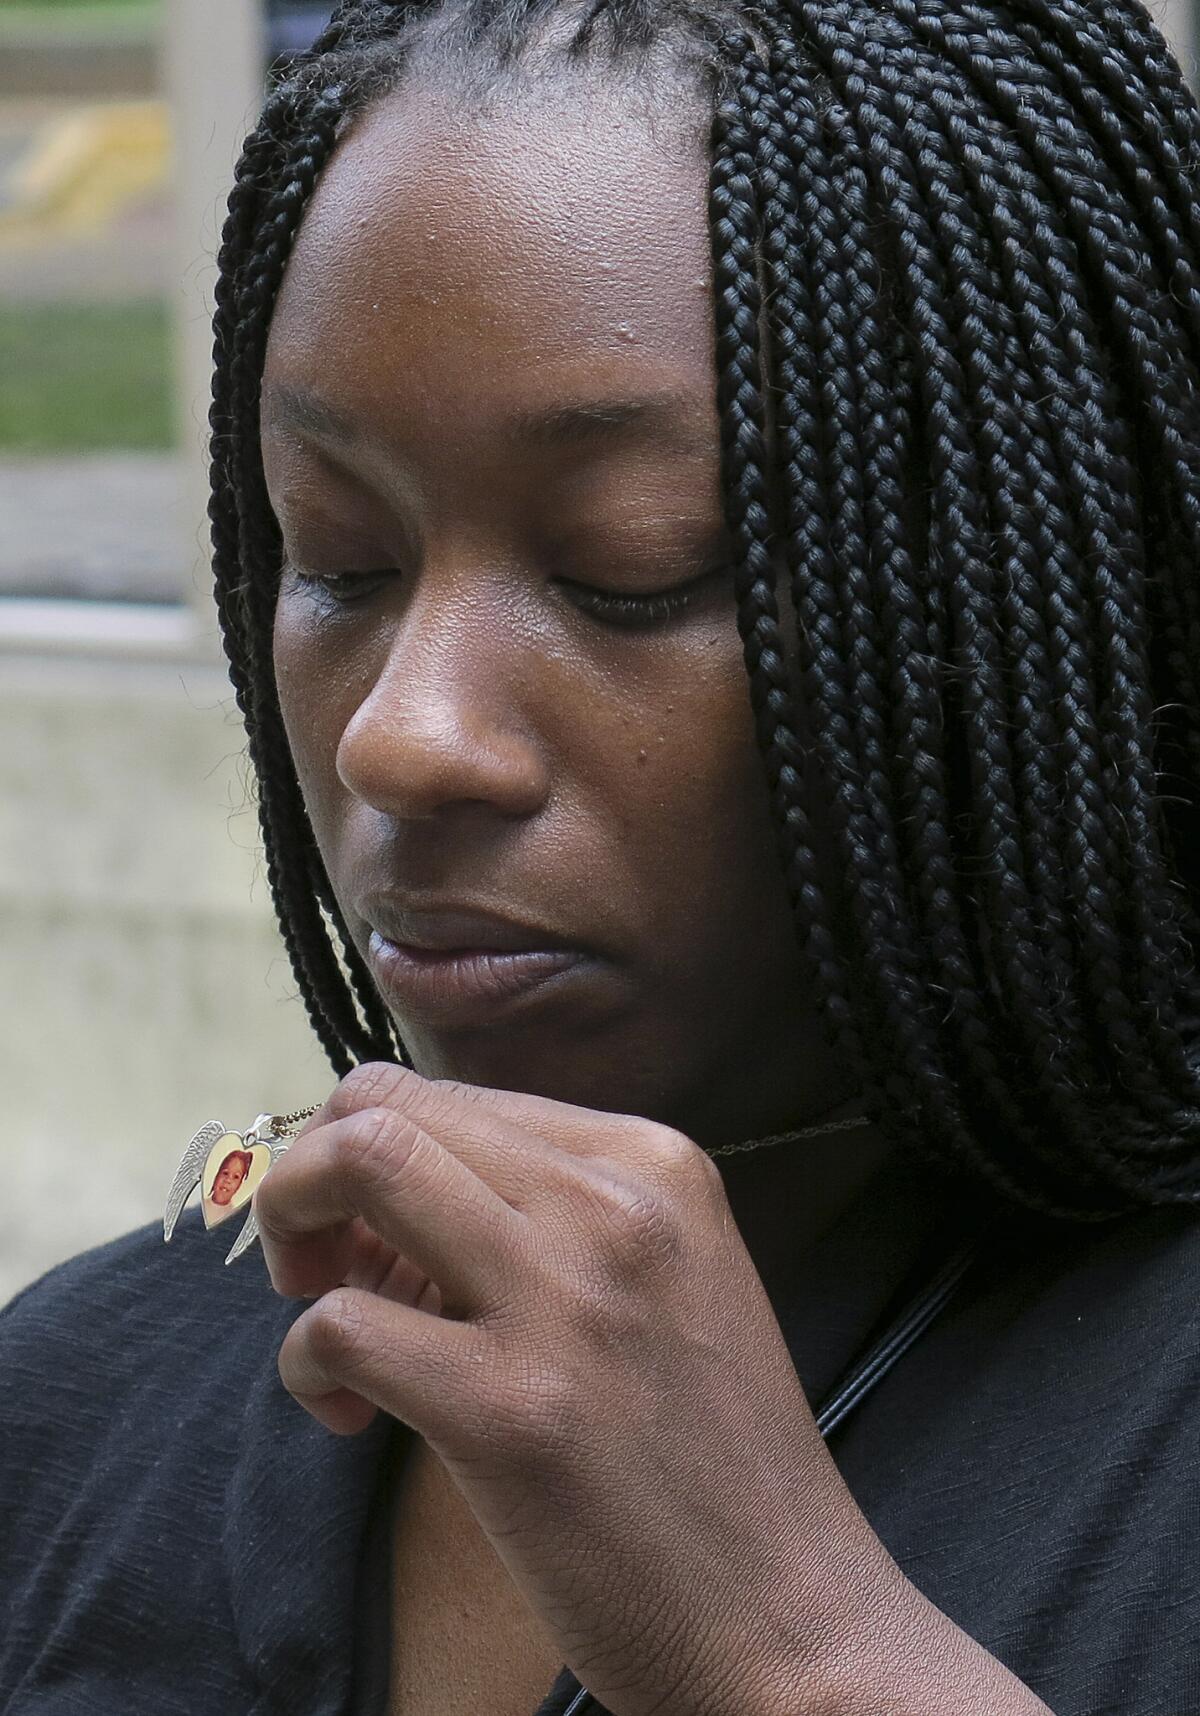 Tarshia Williams displays a pendant with her daughter's face on it outside of a federal courthouse in Honolulu on Thursday. A federal jury convicted the girl's father, former Hawaii soldier Naeem Williams, of murder in the beating death of the 5-year-old girl, a capital offense in a state that doesn't have the death penalty.